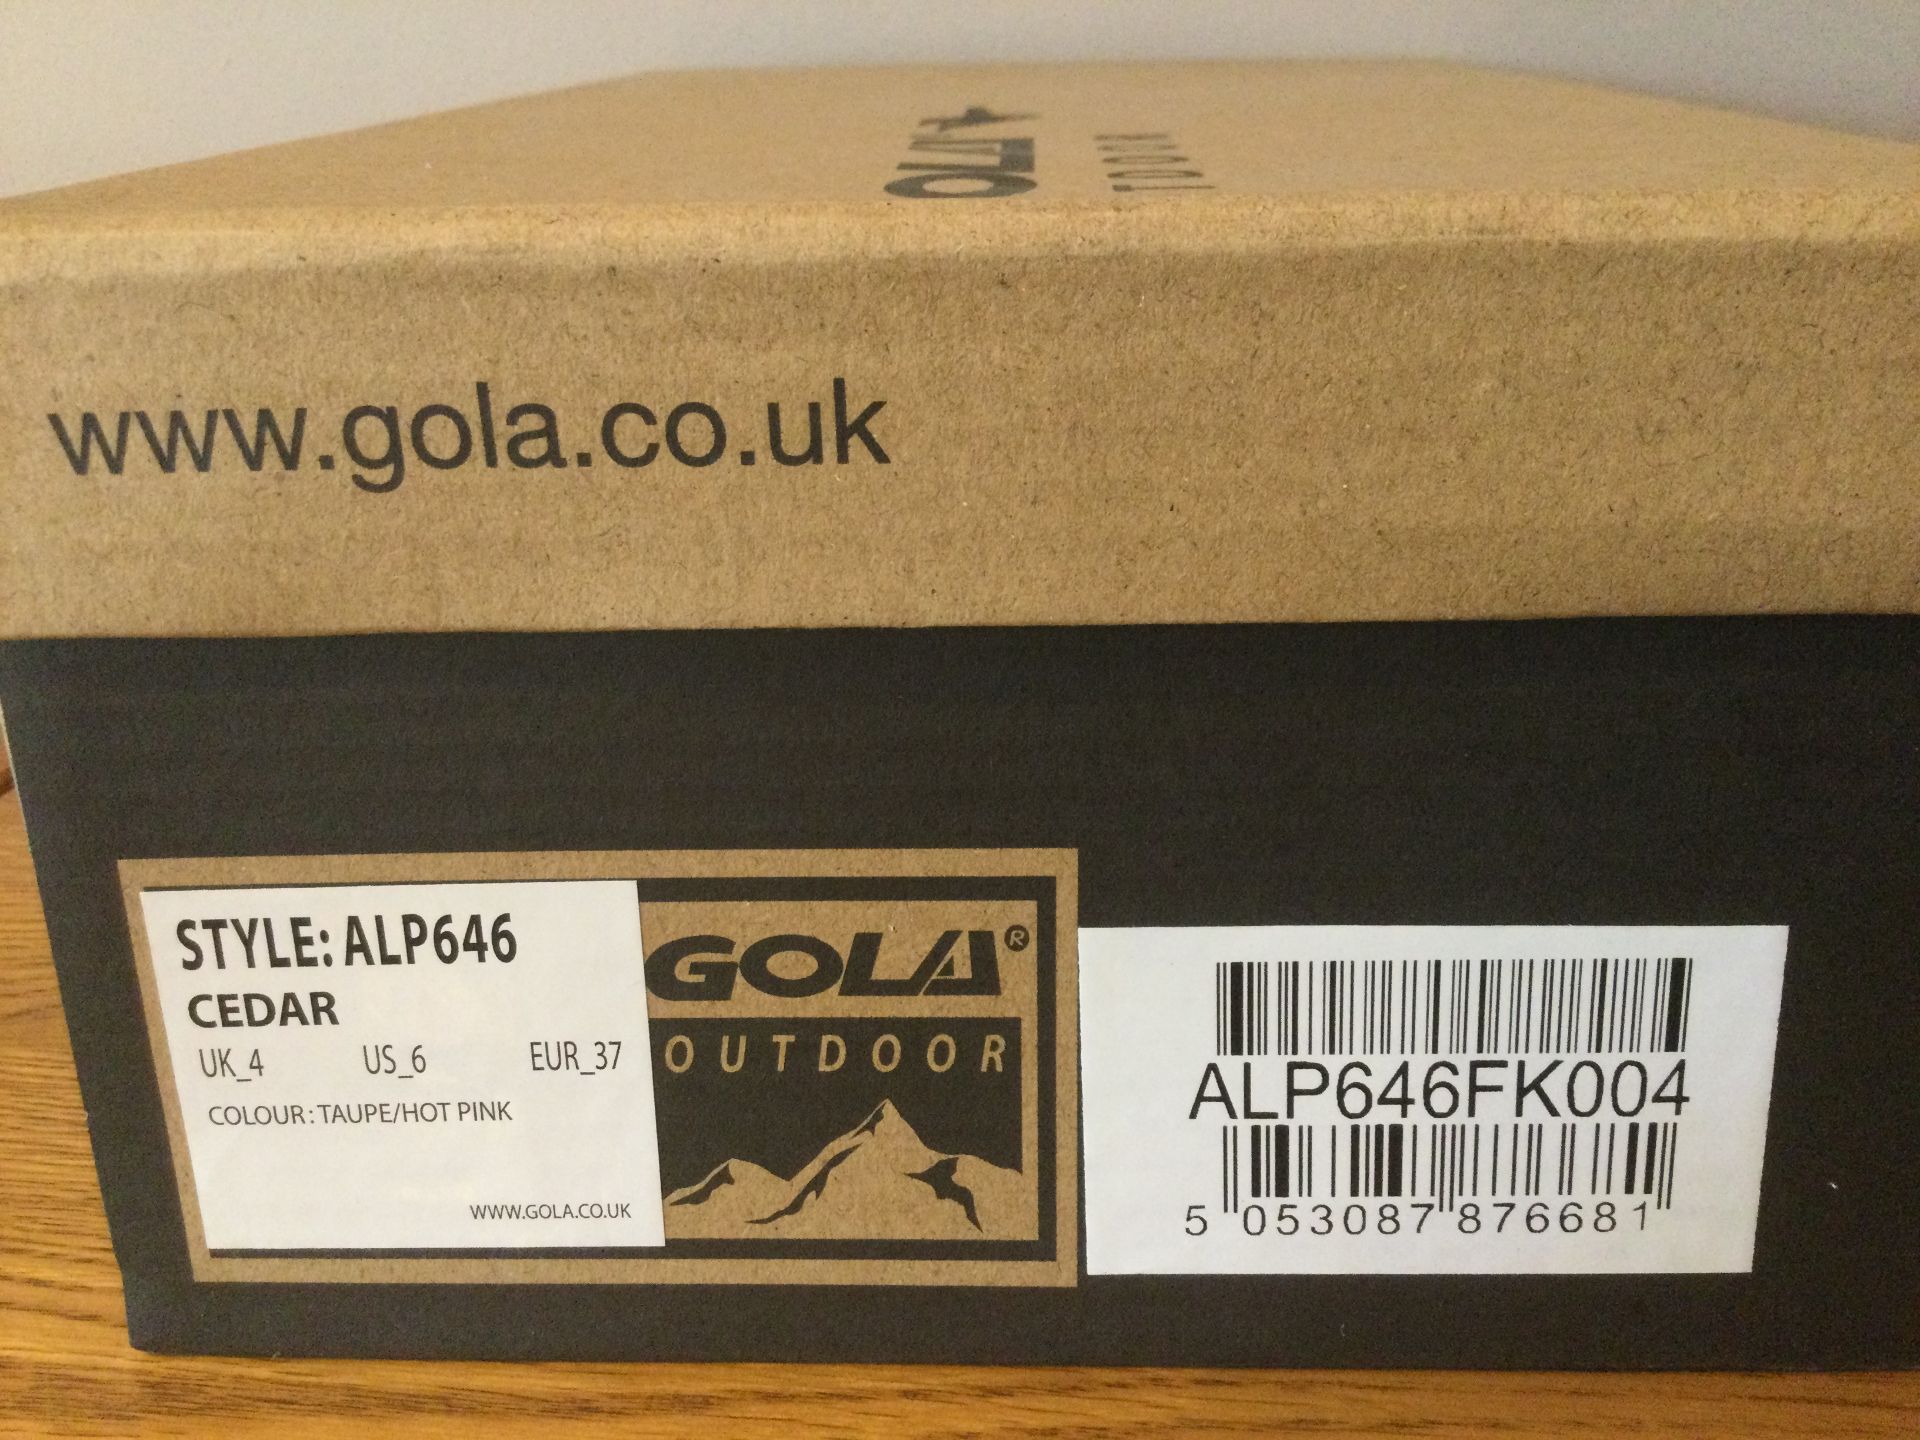 Gola Womens “Cedar” Hiking Sandals, Taupe/Hot Pink, Size 4 - Brand New - Image 4 of 4